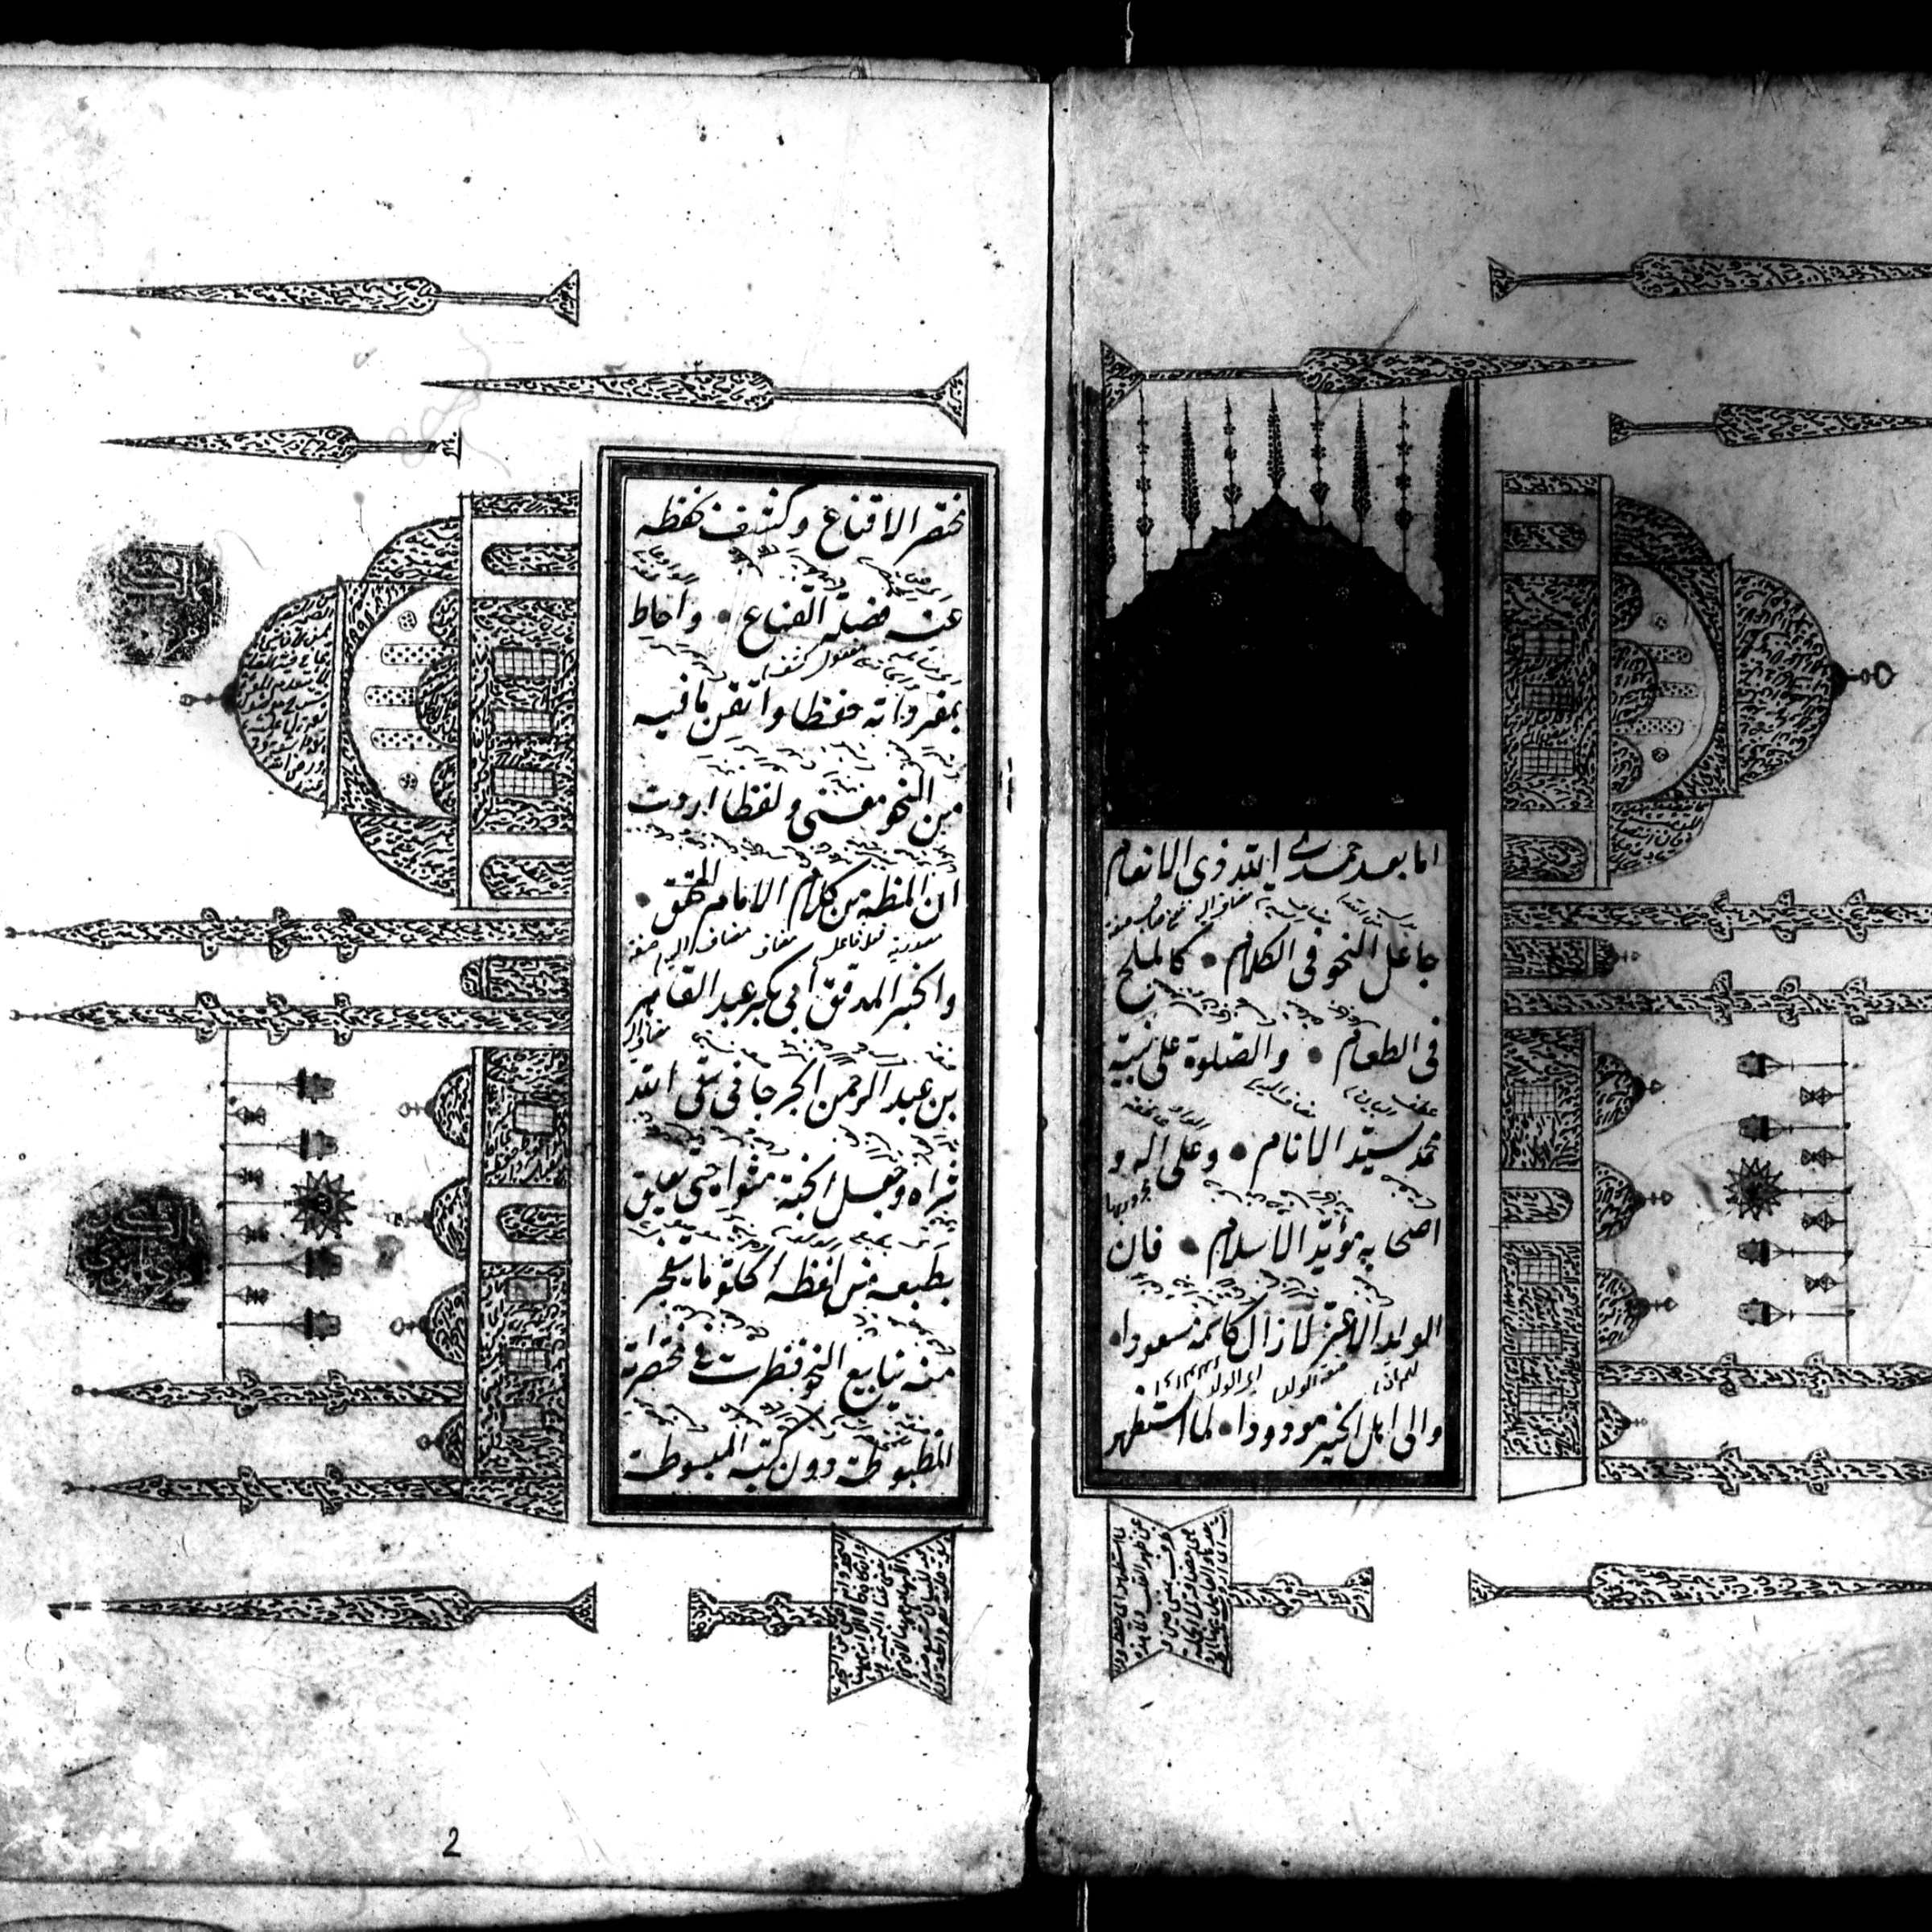 Arabic grammatical text with elaborate marginal notes shaped into visual images, from MS Orient. 154 (microfilm 49182R)